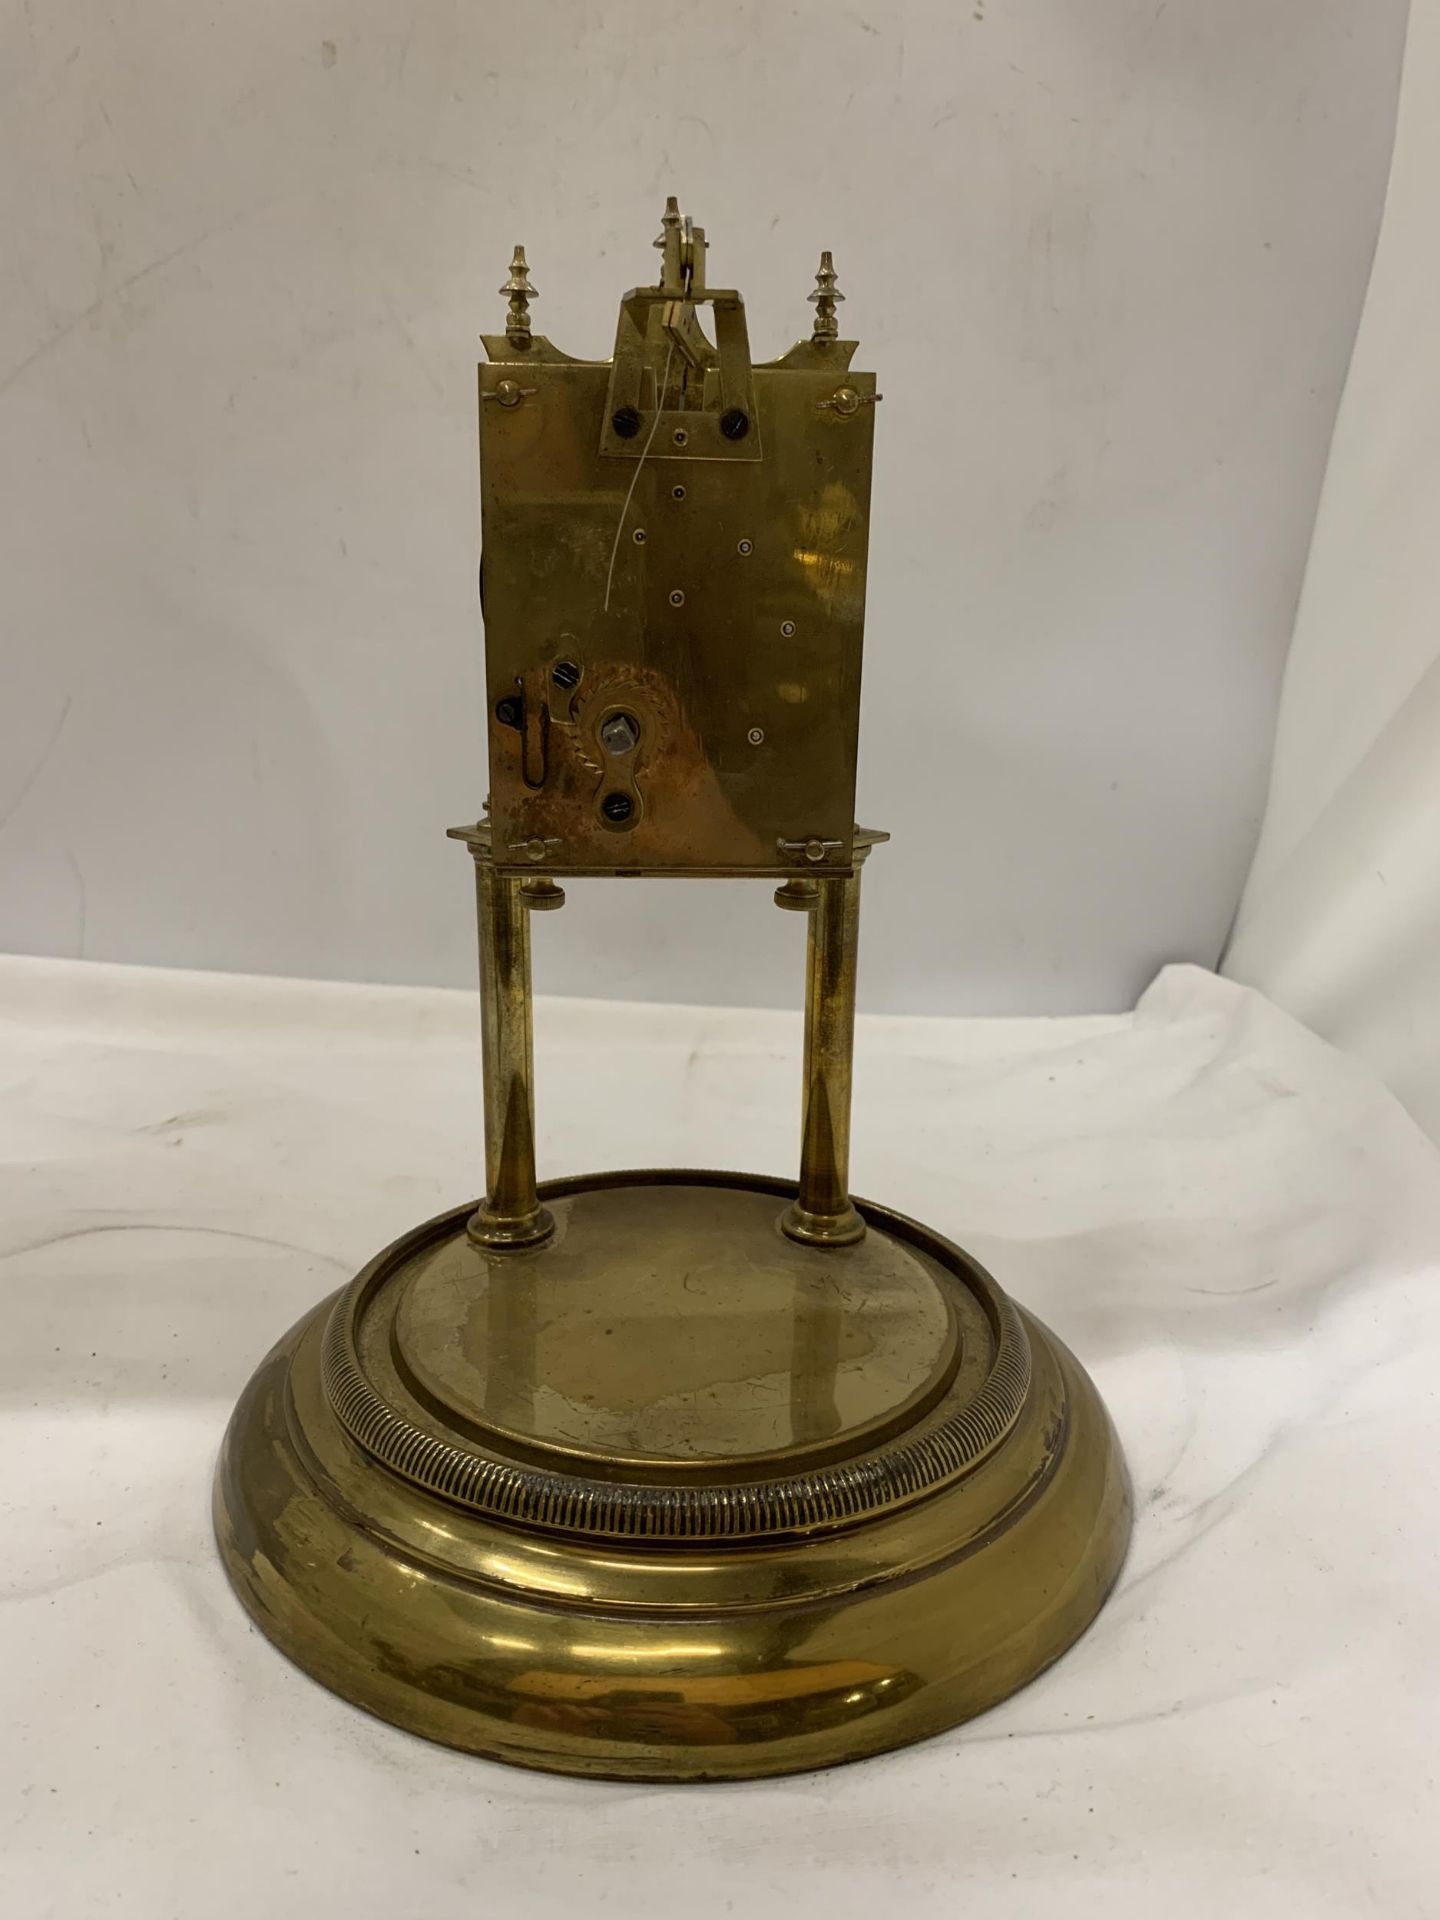 AN EARLY 20TH CENTURY ANNIVERSARY CLOCK WITH GLASS DOME - APPROXIMATELY 29CM - Image 6 of 8